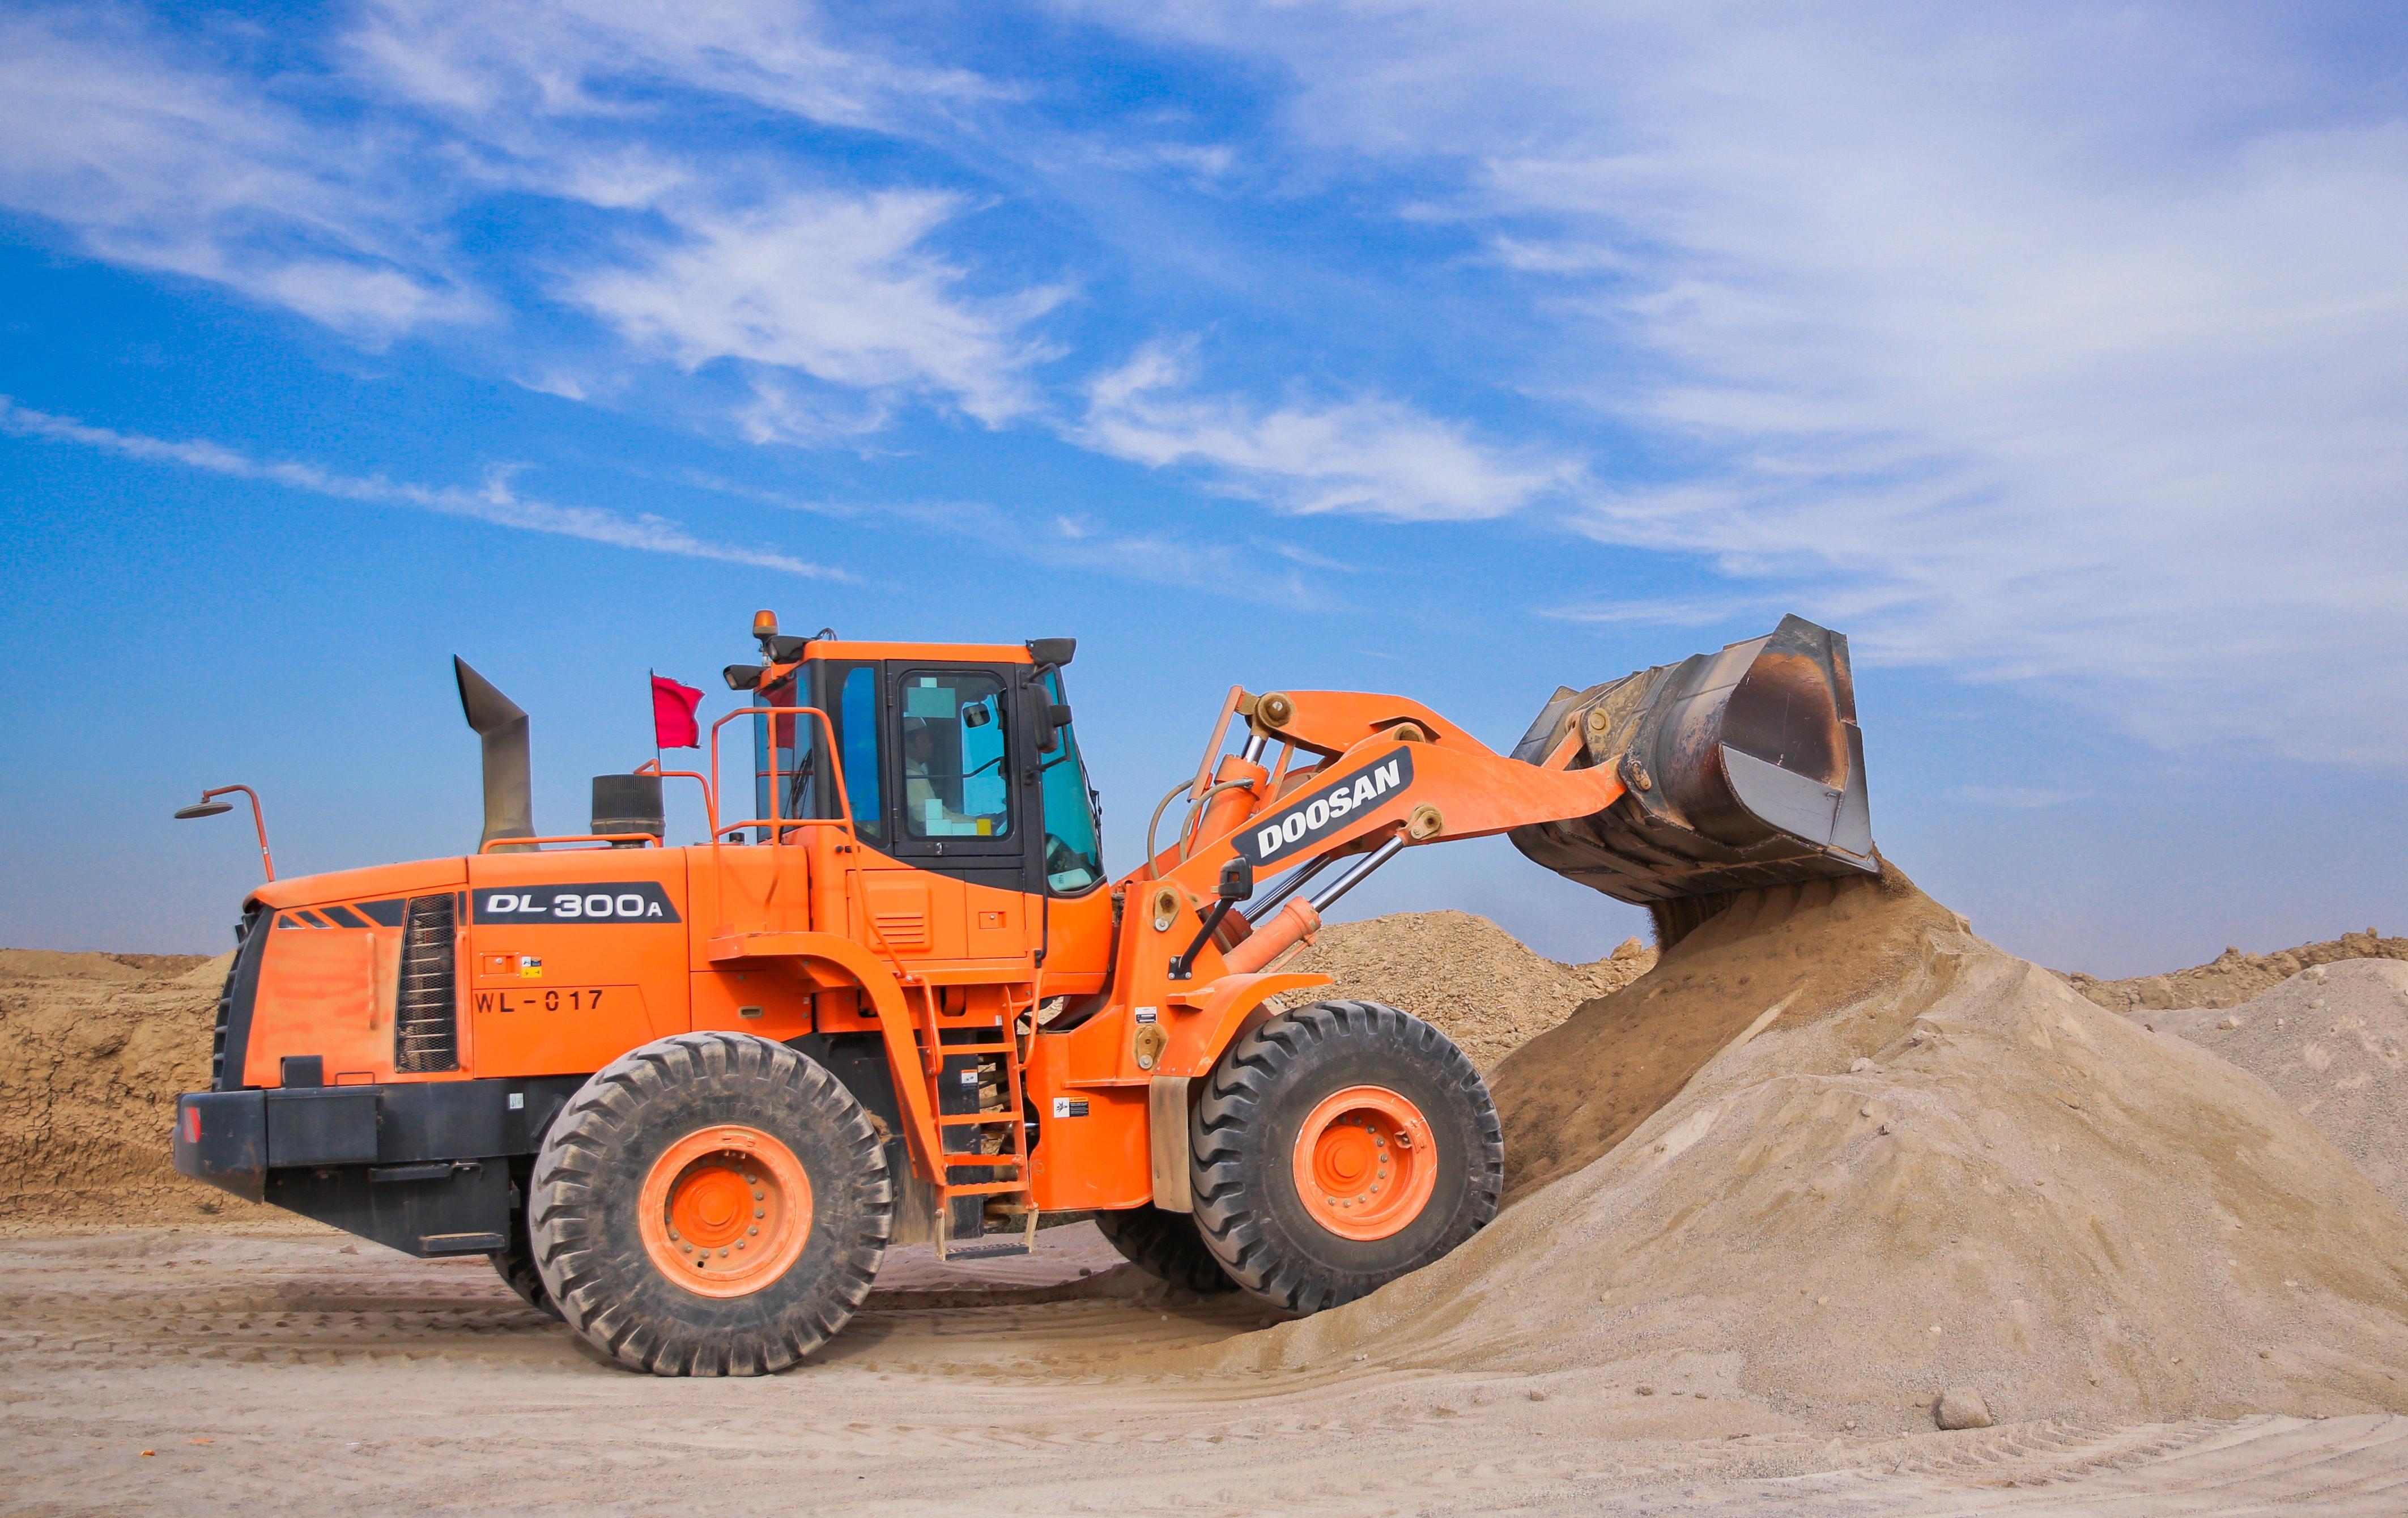 A large orange tractor is digging sand.